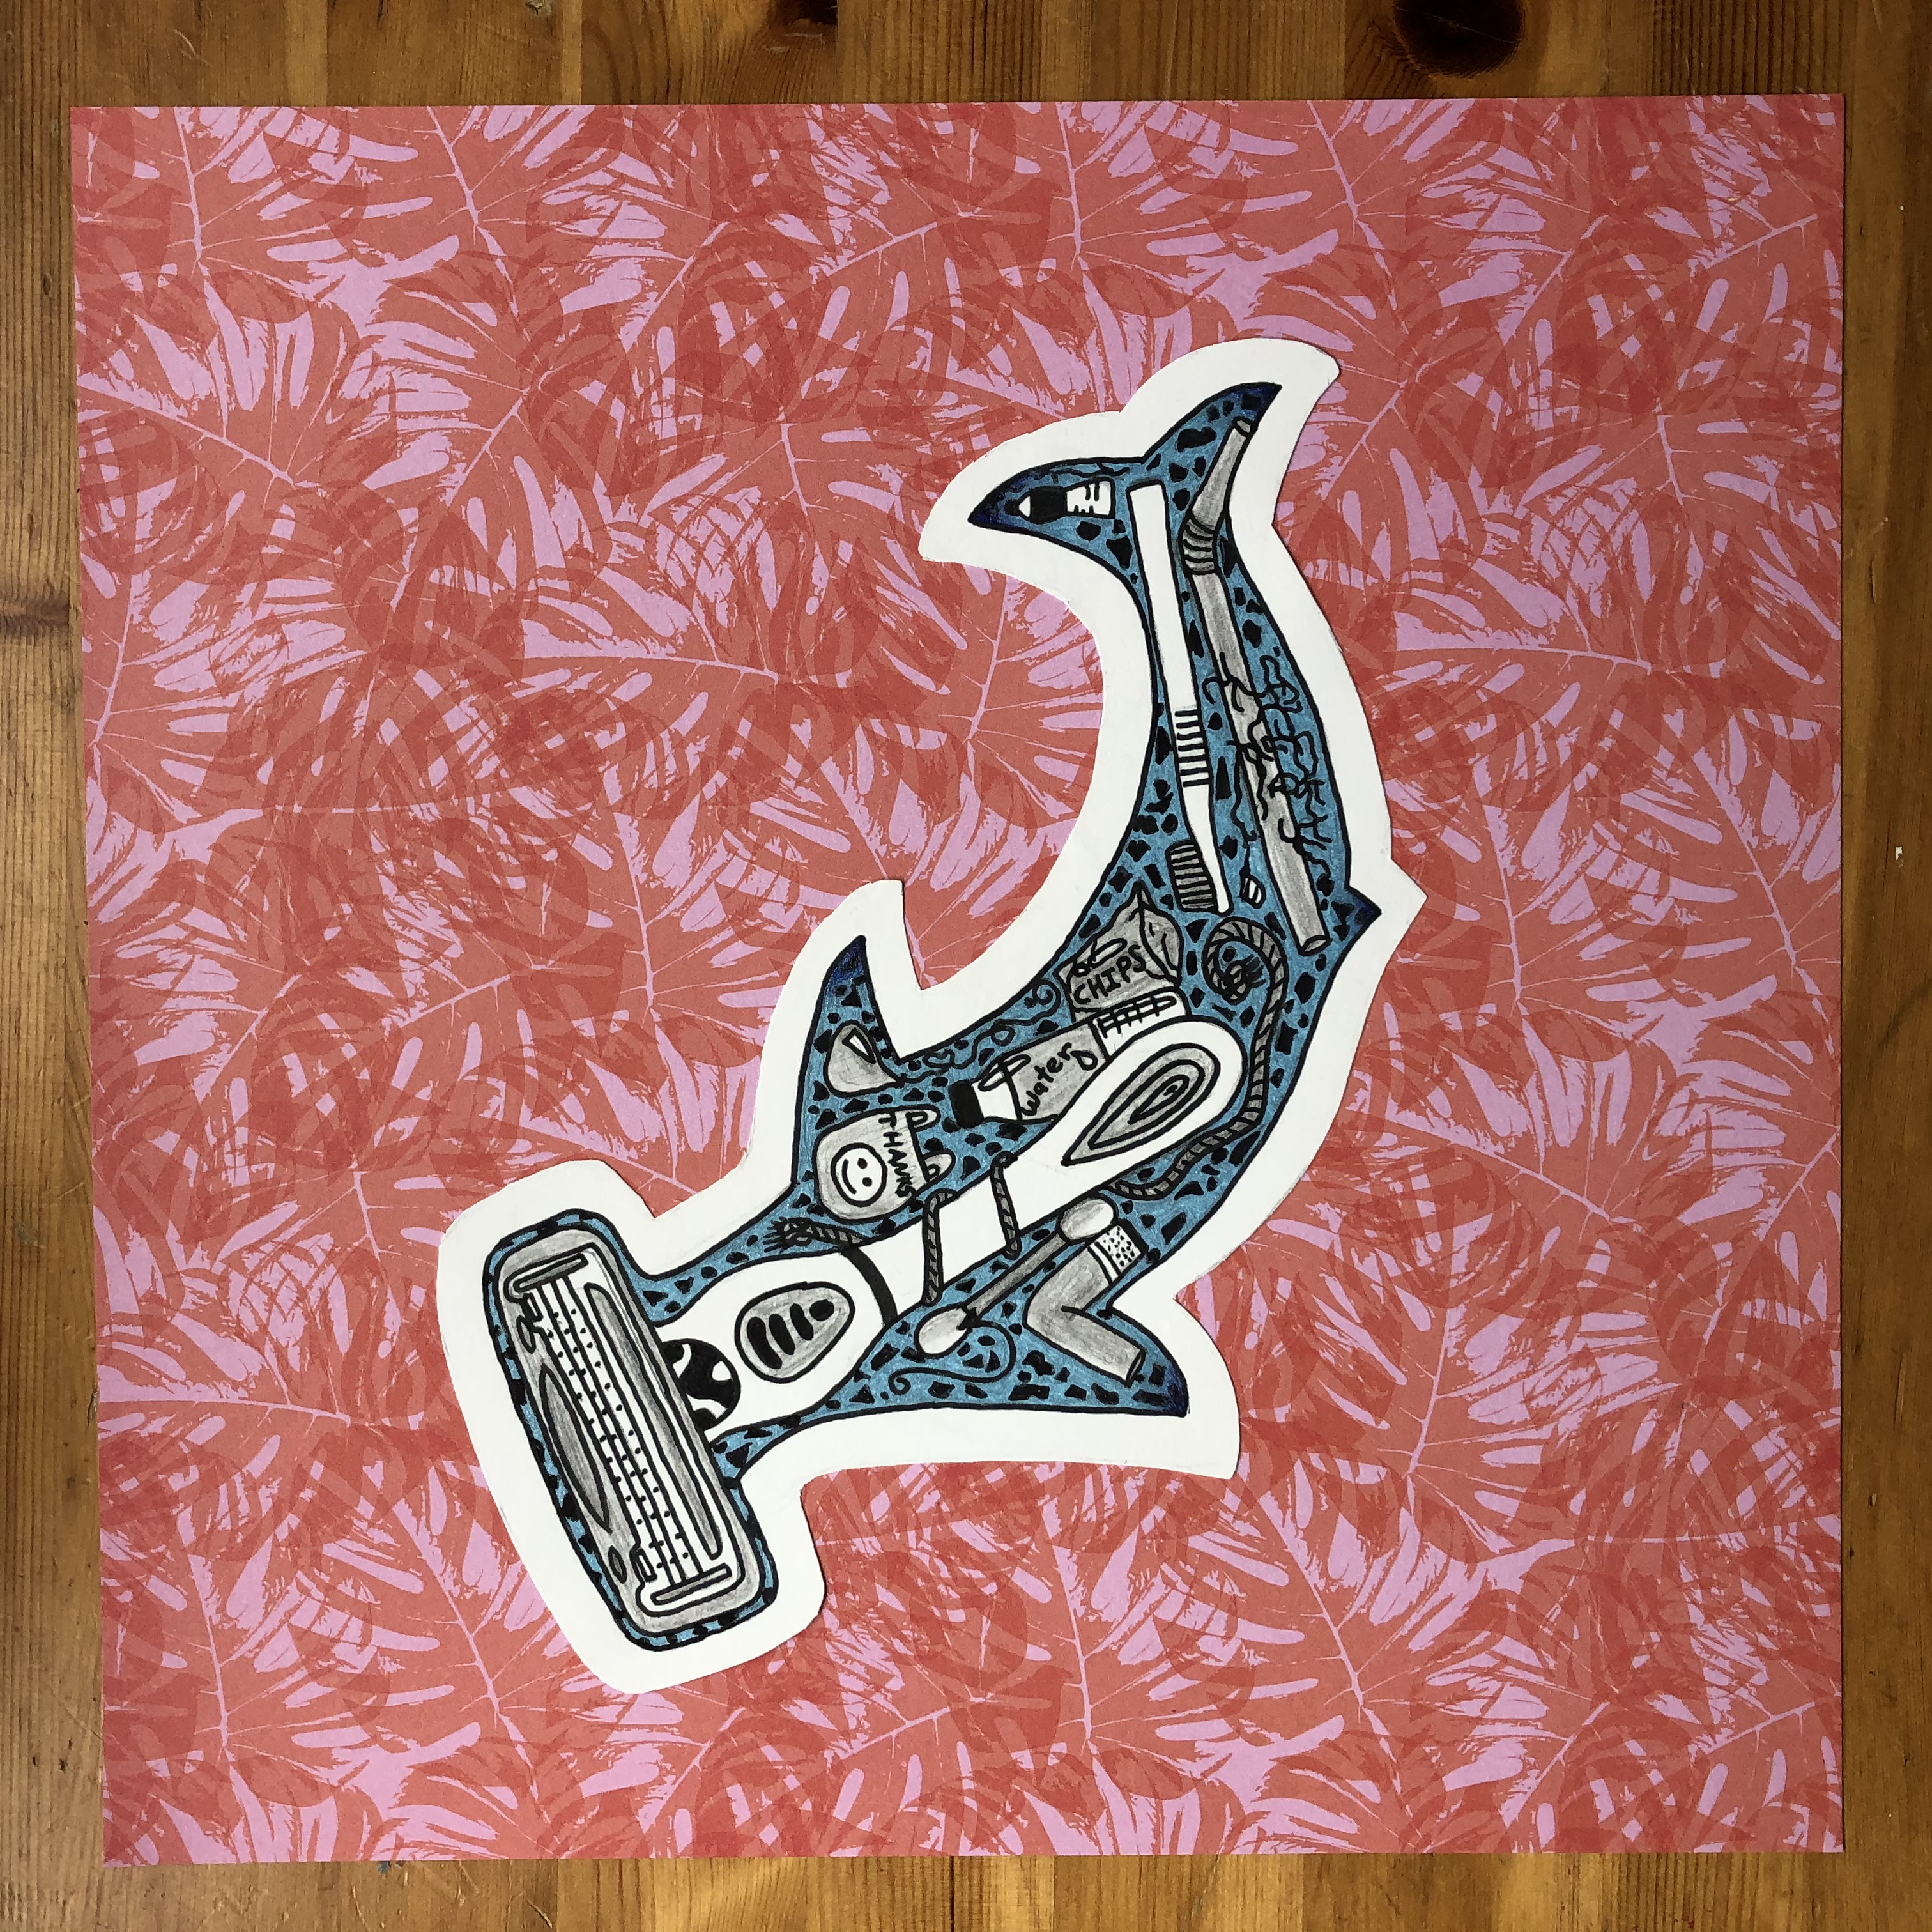 Youth artwork shows a stylized silhouette of a hammerhead shark that is filled with marine debris, including a razor, cotton swap, plastic bag, toothbrush, straw, water bottle, and rope. It is set on a background of tropical leaves.